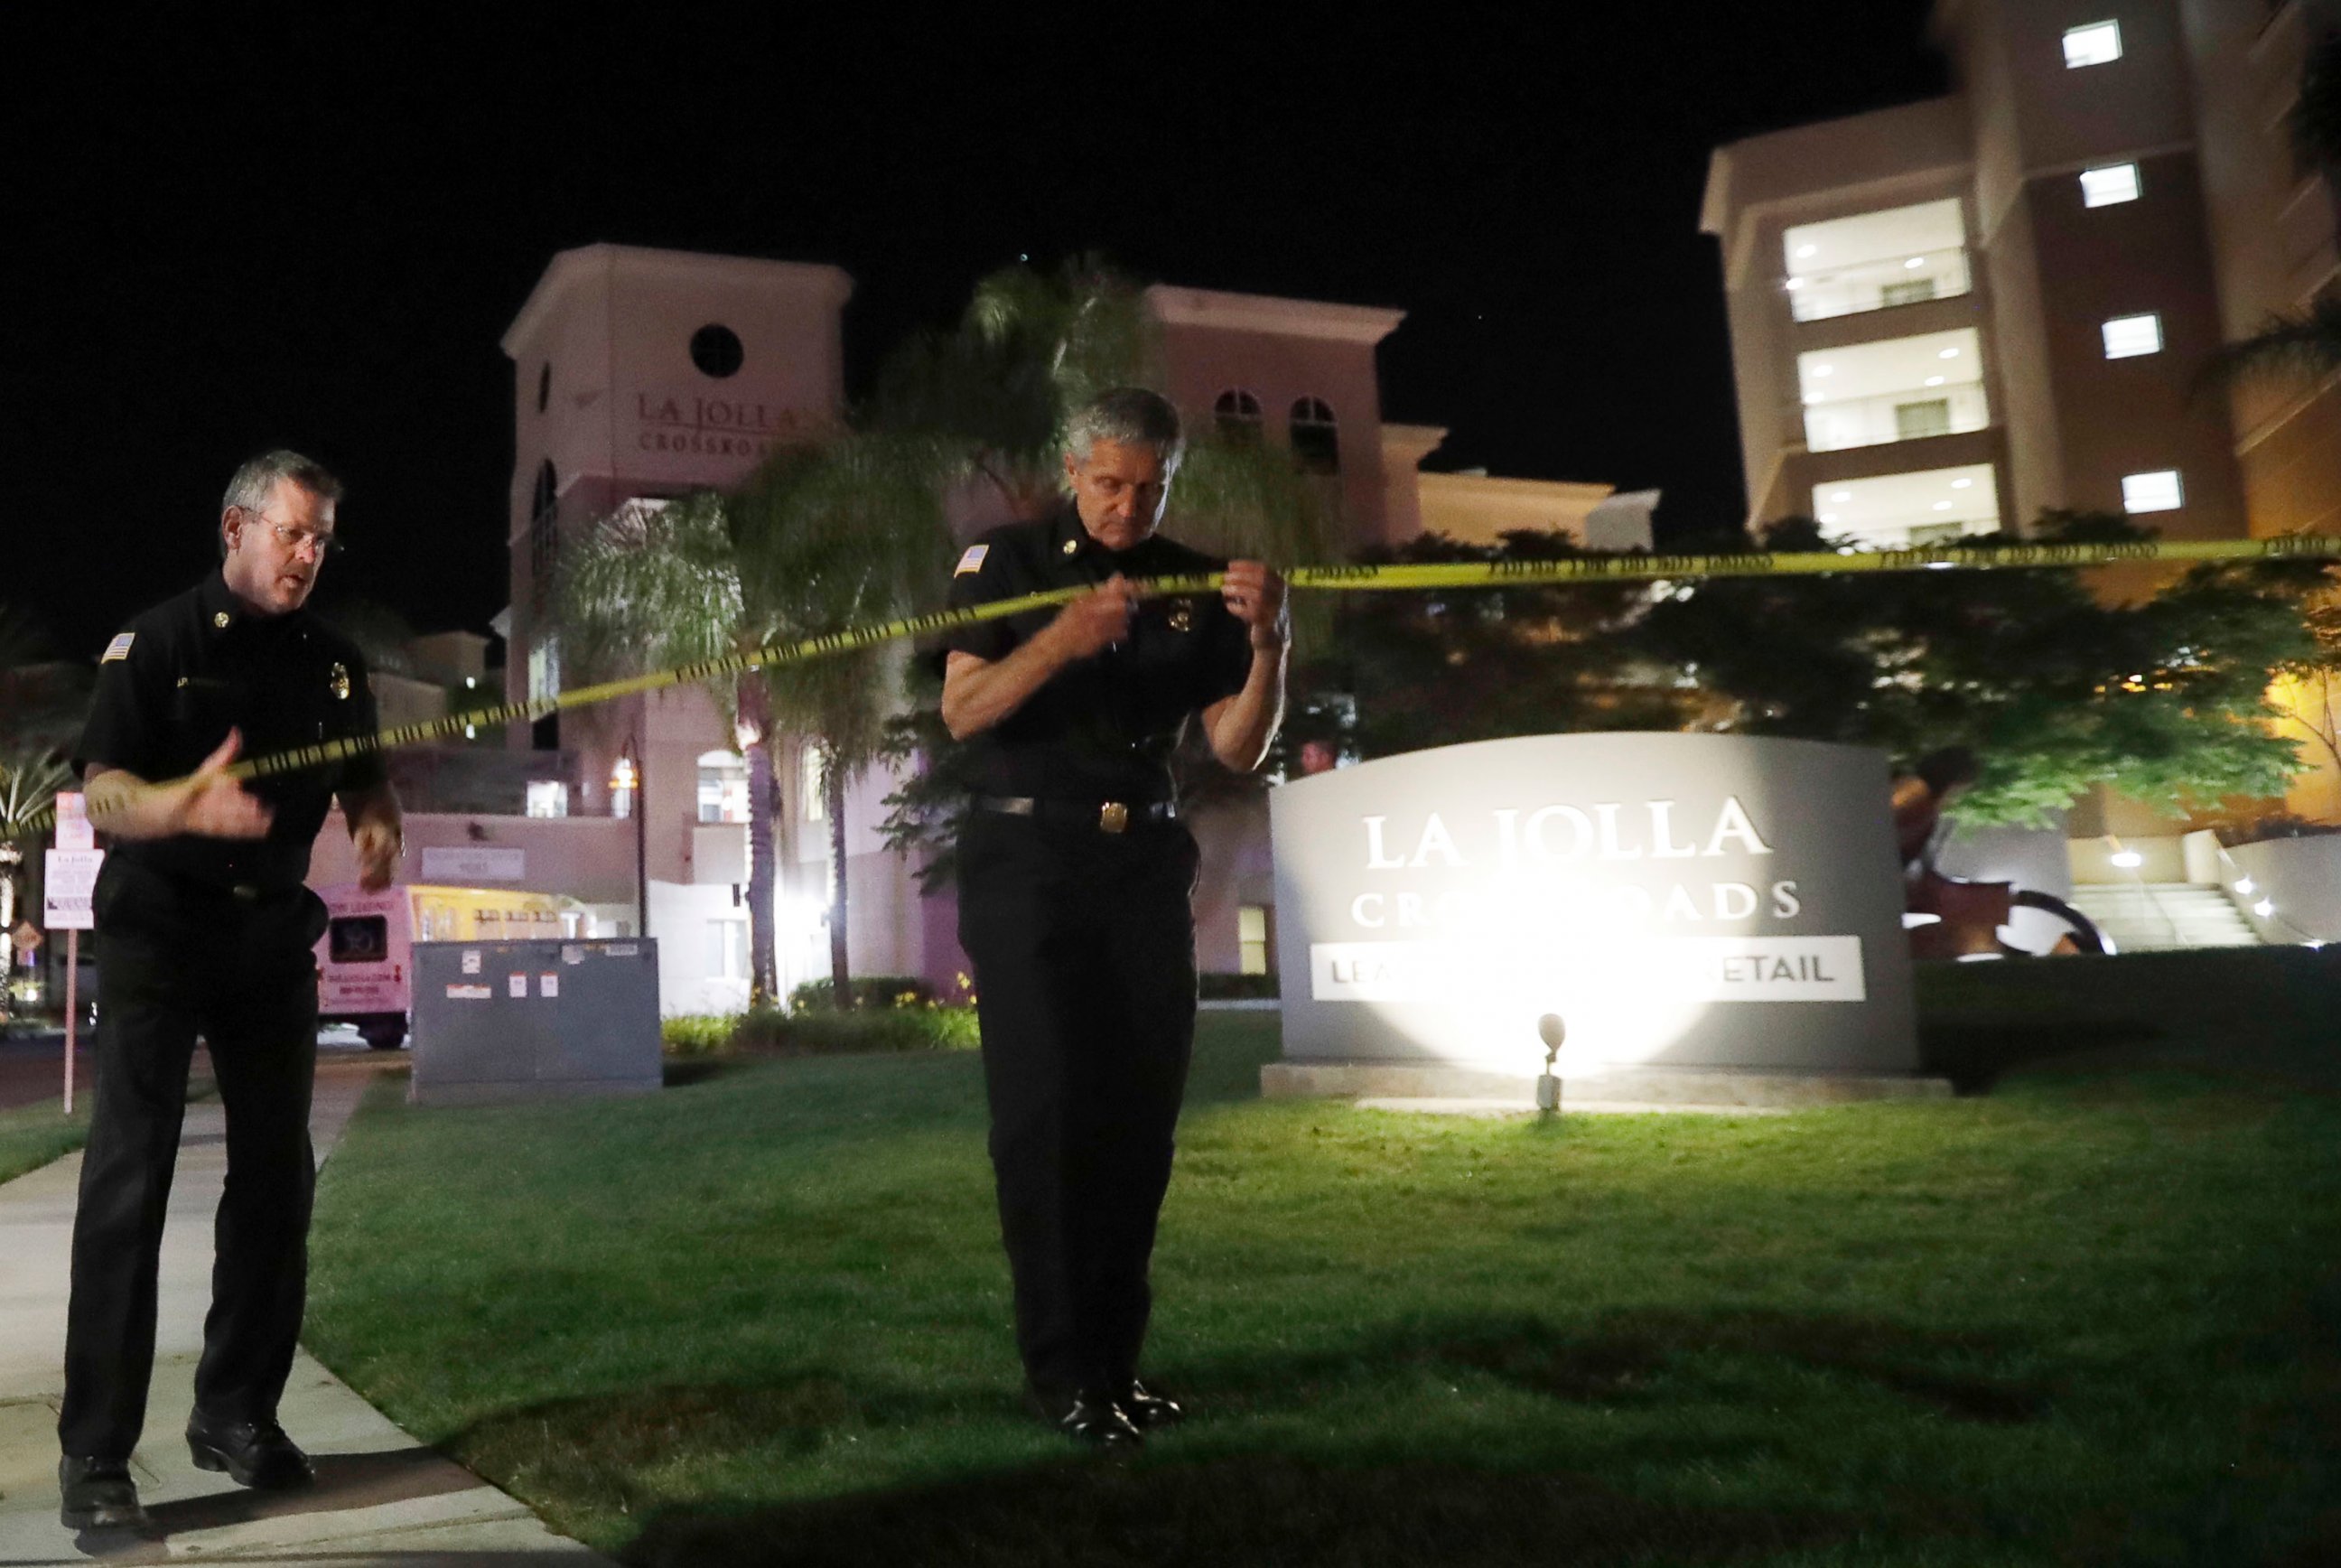 PHOTO: San Diego police officers at the scene of a shooting at La Jolla apartment, April 30, 2017, in San Diego